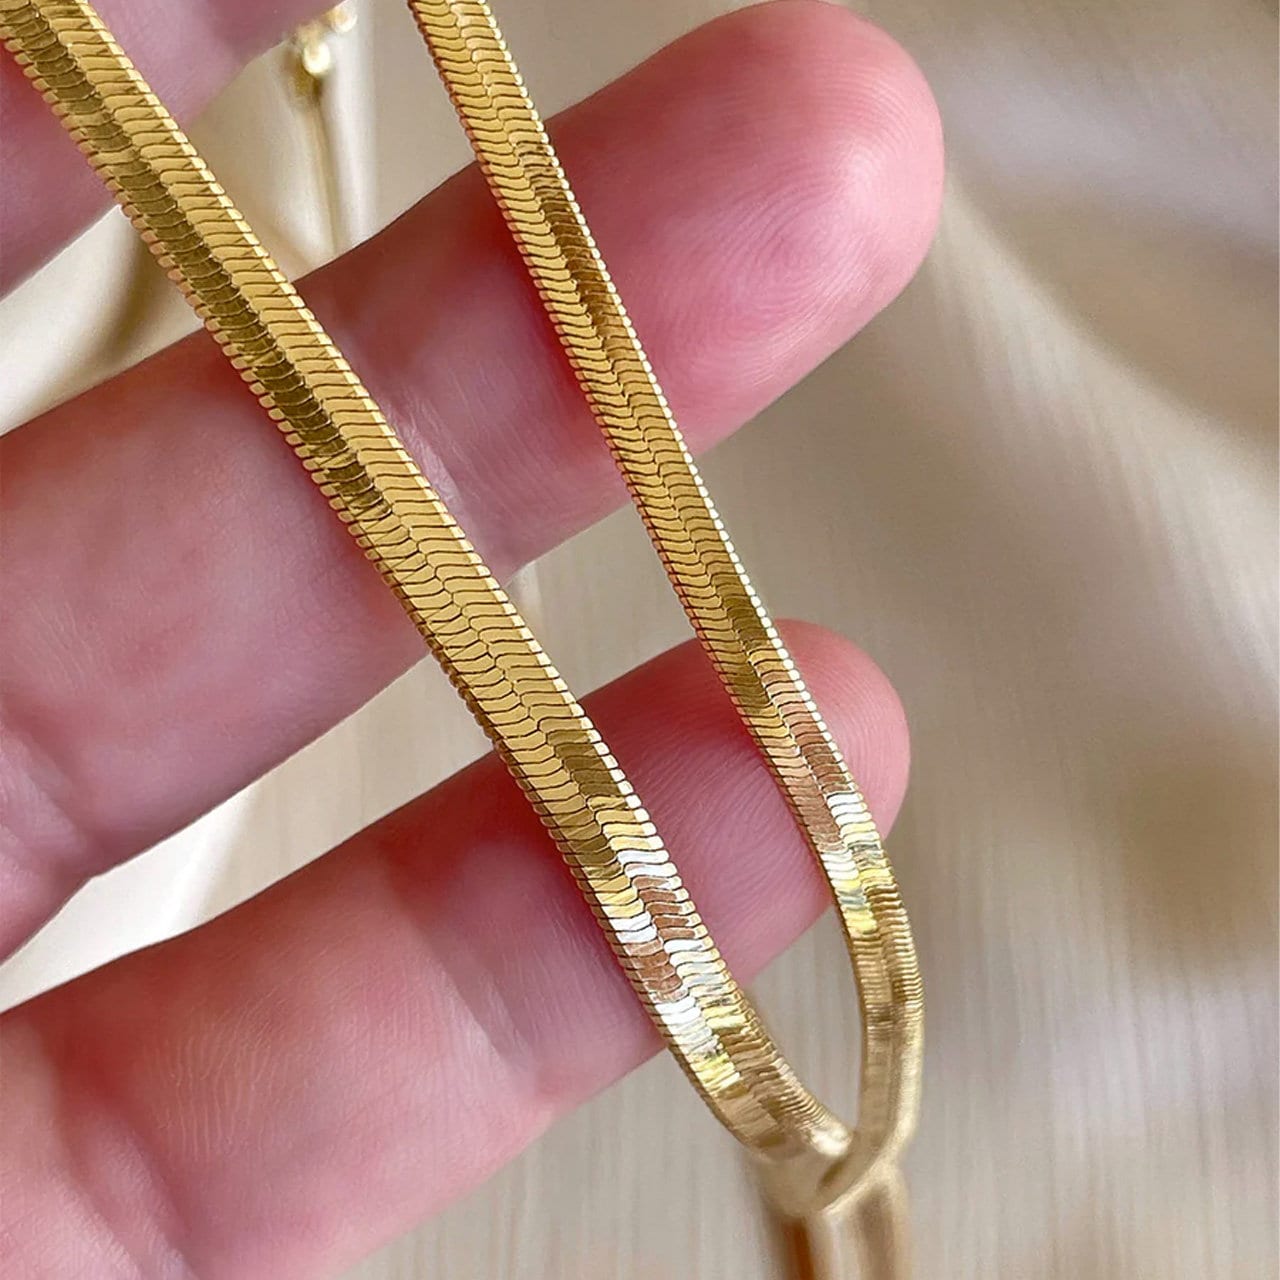 Buy Gold Herringbone Necklace, High Quality 18K Gold Plated on Italy 925  Solid Sterling Silver Flat Snake Chain, Liquid Gold Herringbone Chain  Online in India - Etsy